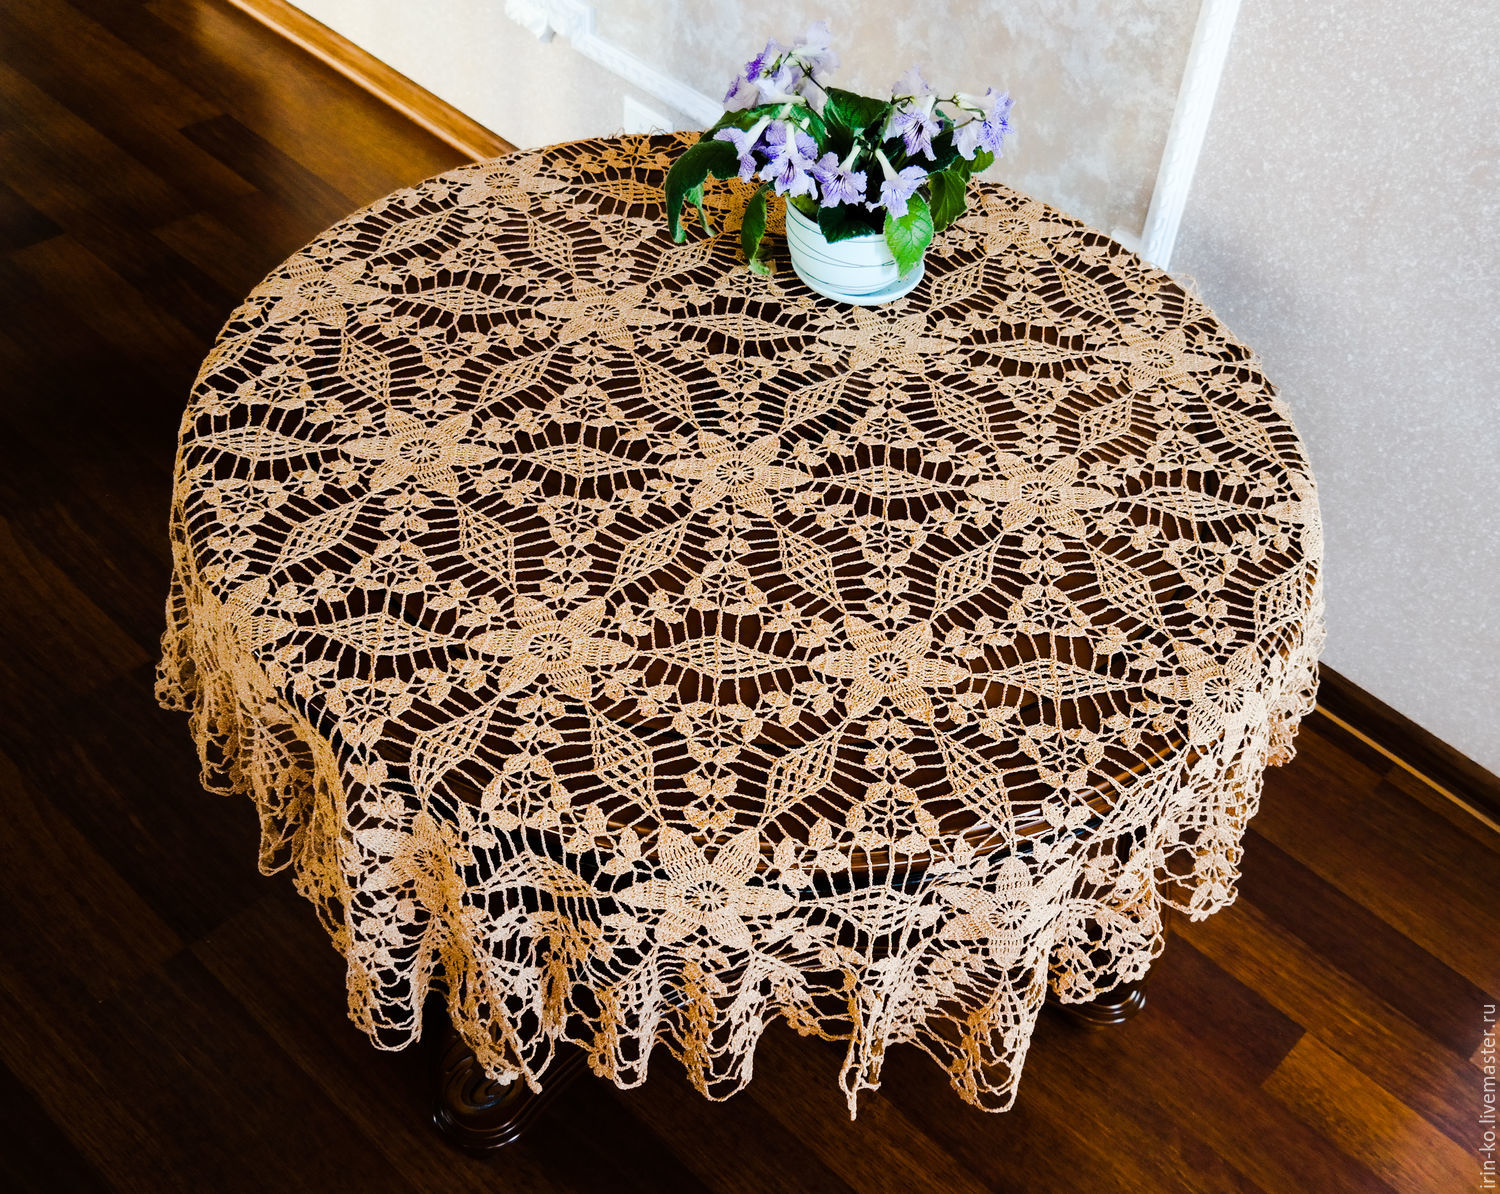 crocheted tablecloth design